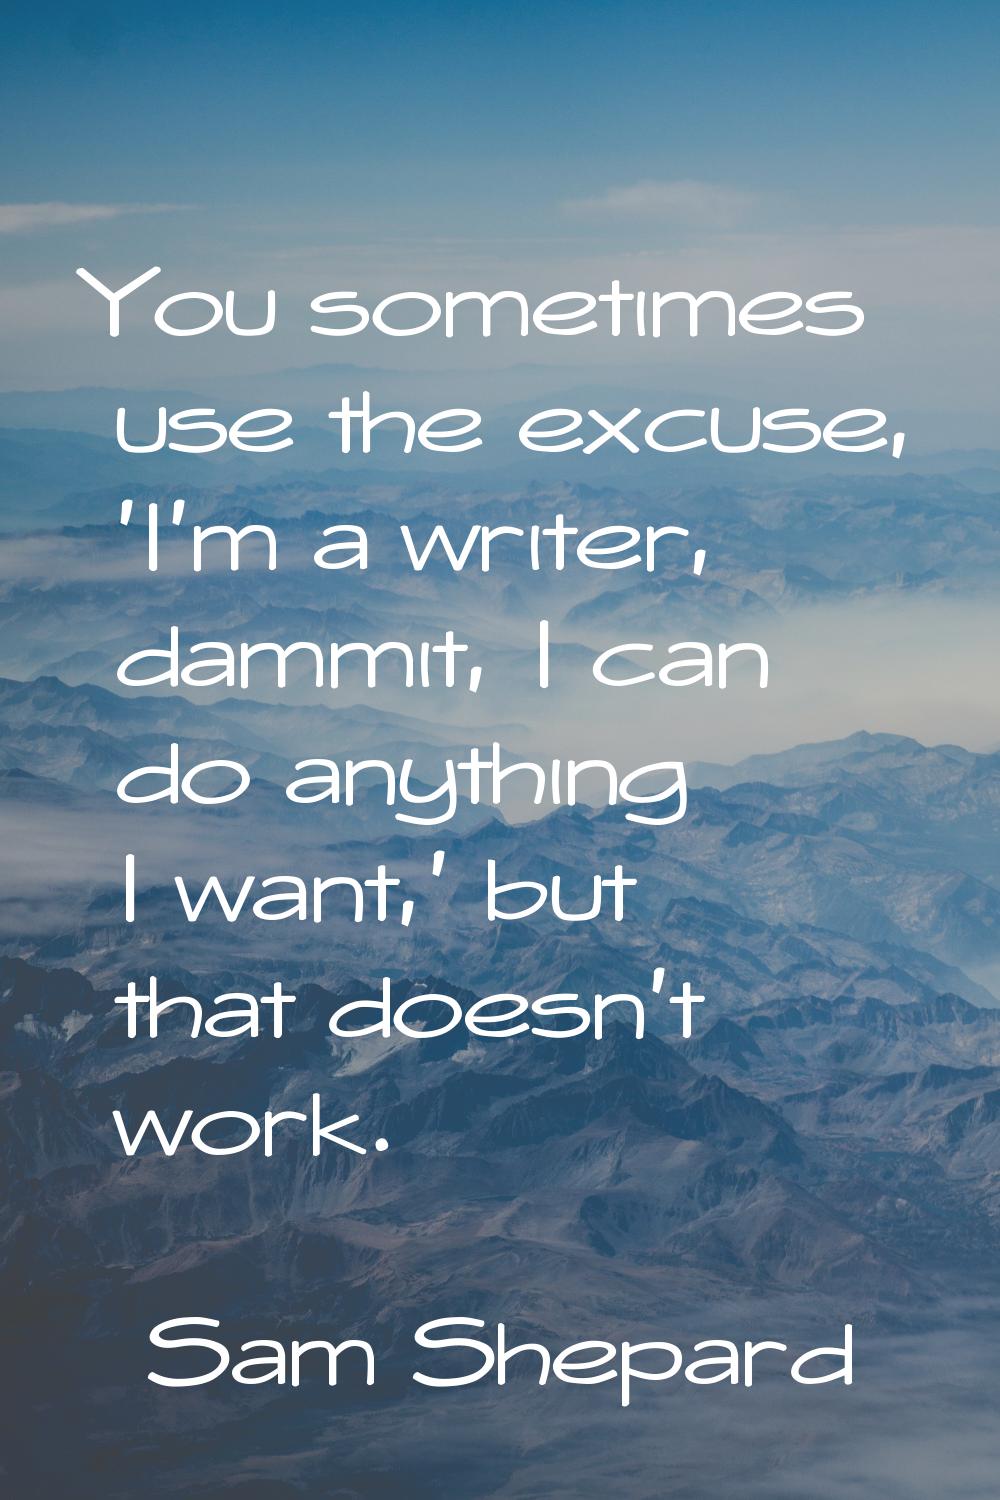 You sometimes use the excuse, 'I'm a writer, dammit, I can do anything I want,' but that doesn't wo